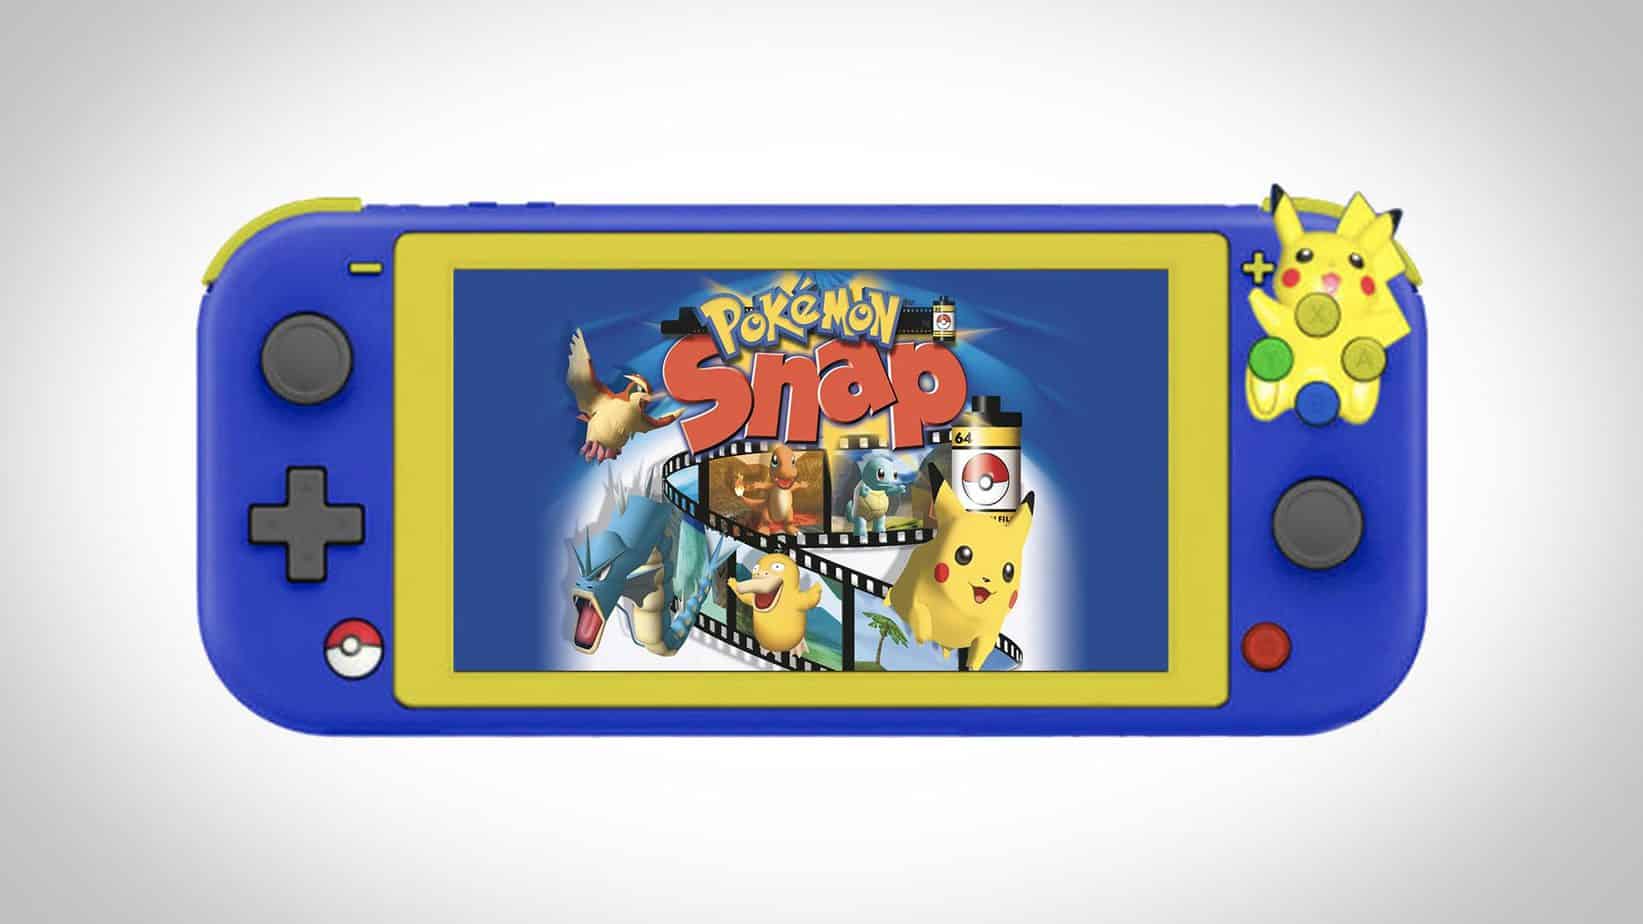 10 Best Custom Nintendo Switch Lite Designs You Have To See - new model 2019 nintendo switch lite games